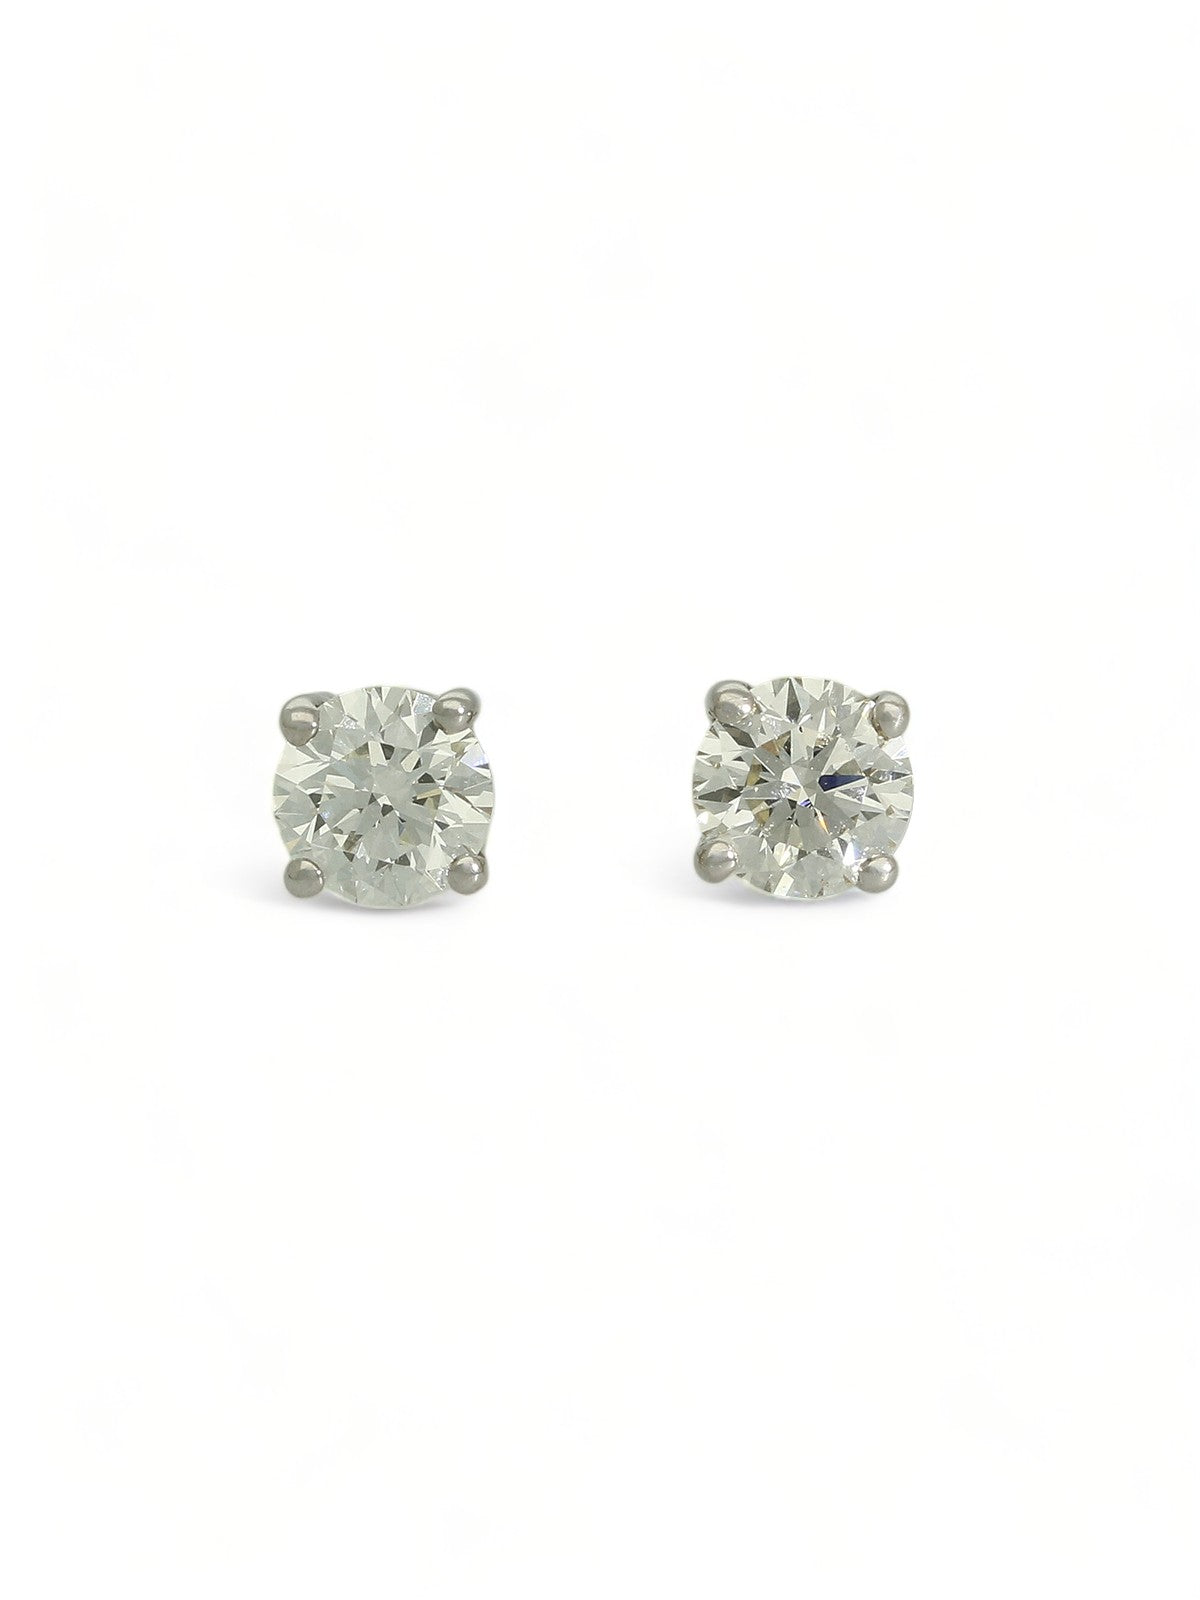 Diamond Solitaire Stud Earrings "The Catherine Collection" 0.80ct Round Brilliant Cut in 18ct White Gold